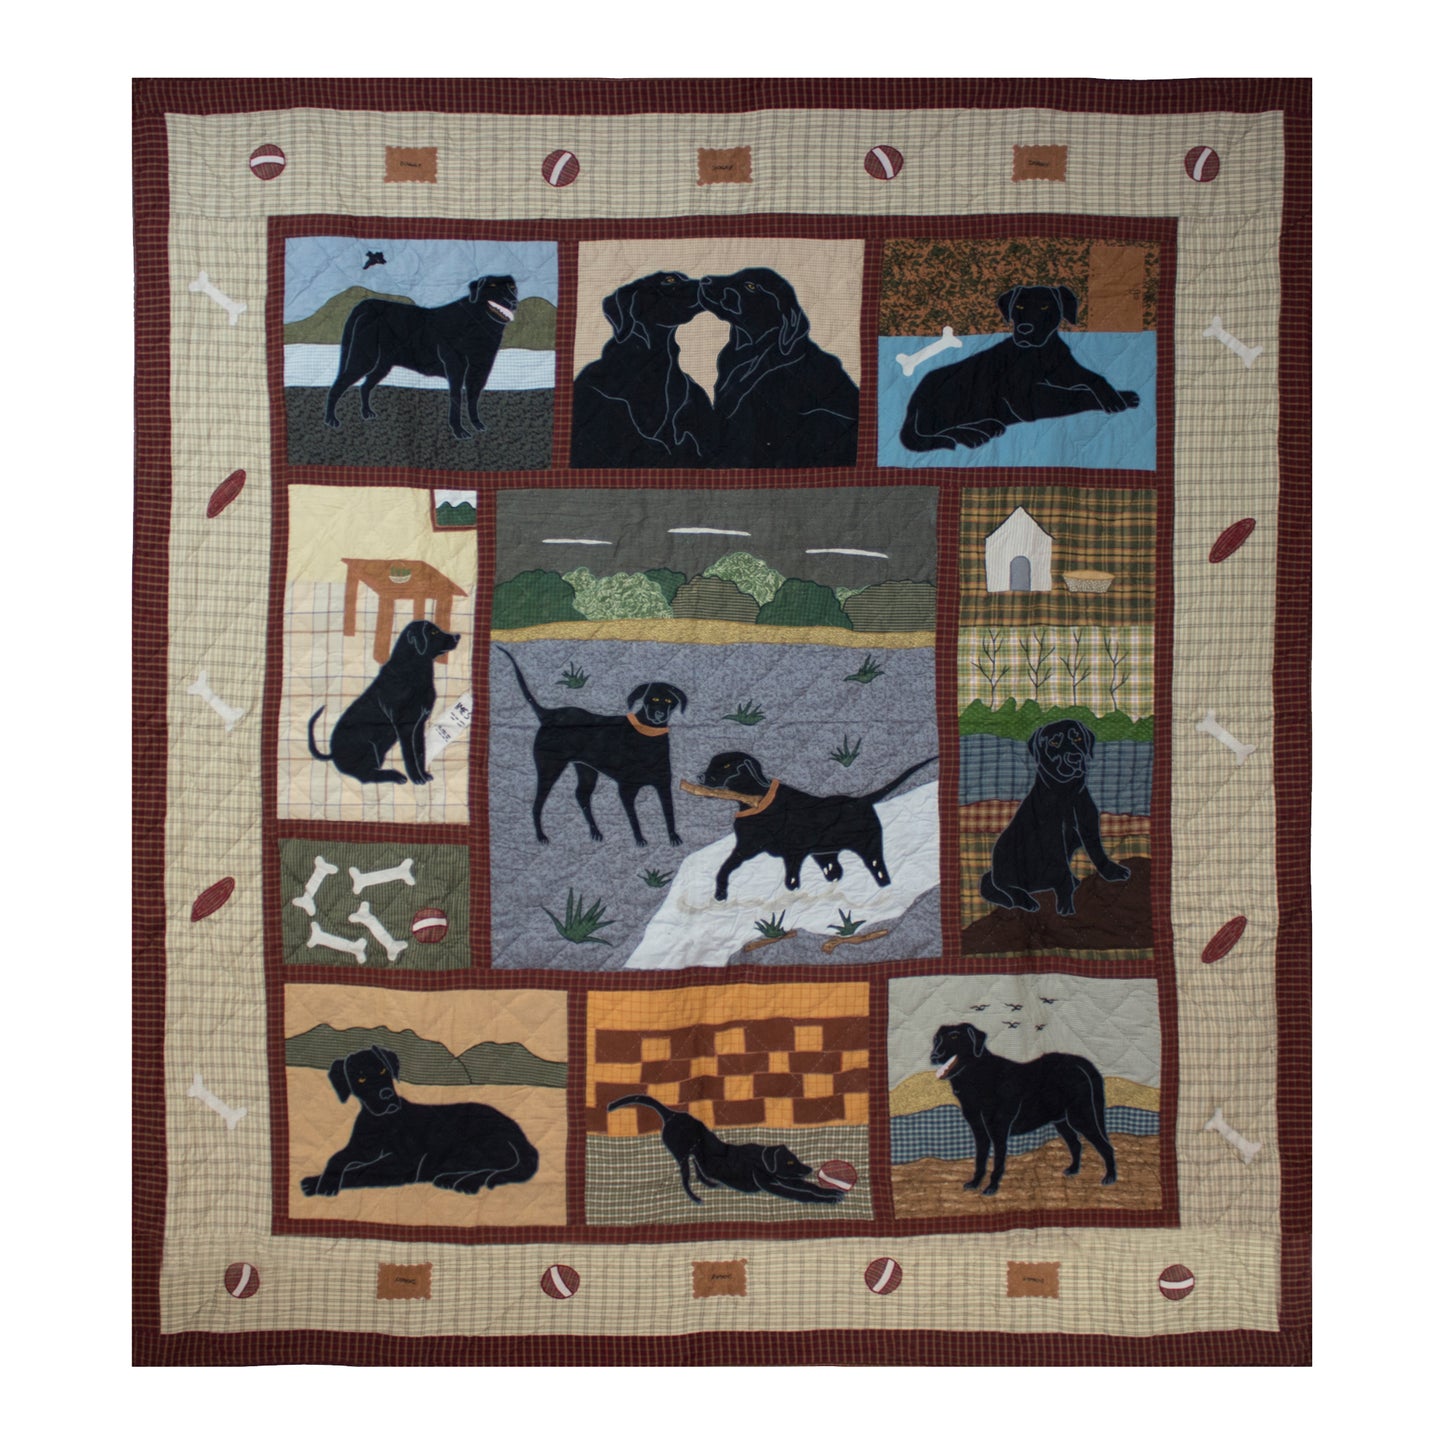 Pick of Labs Quilt, Hand cut and Appliqued cotton fabric motifs.